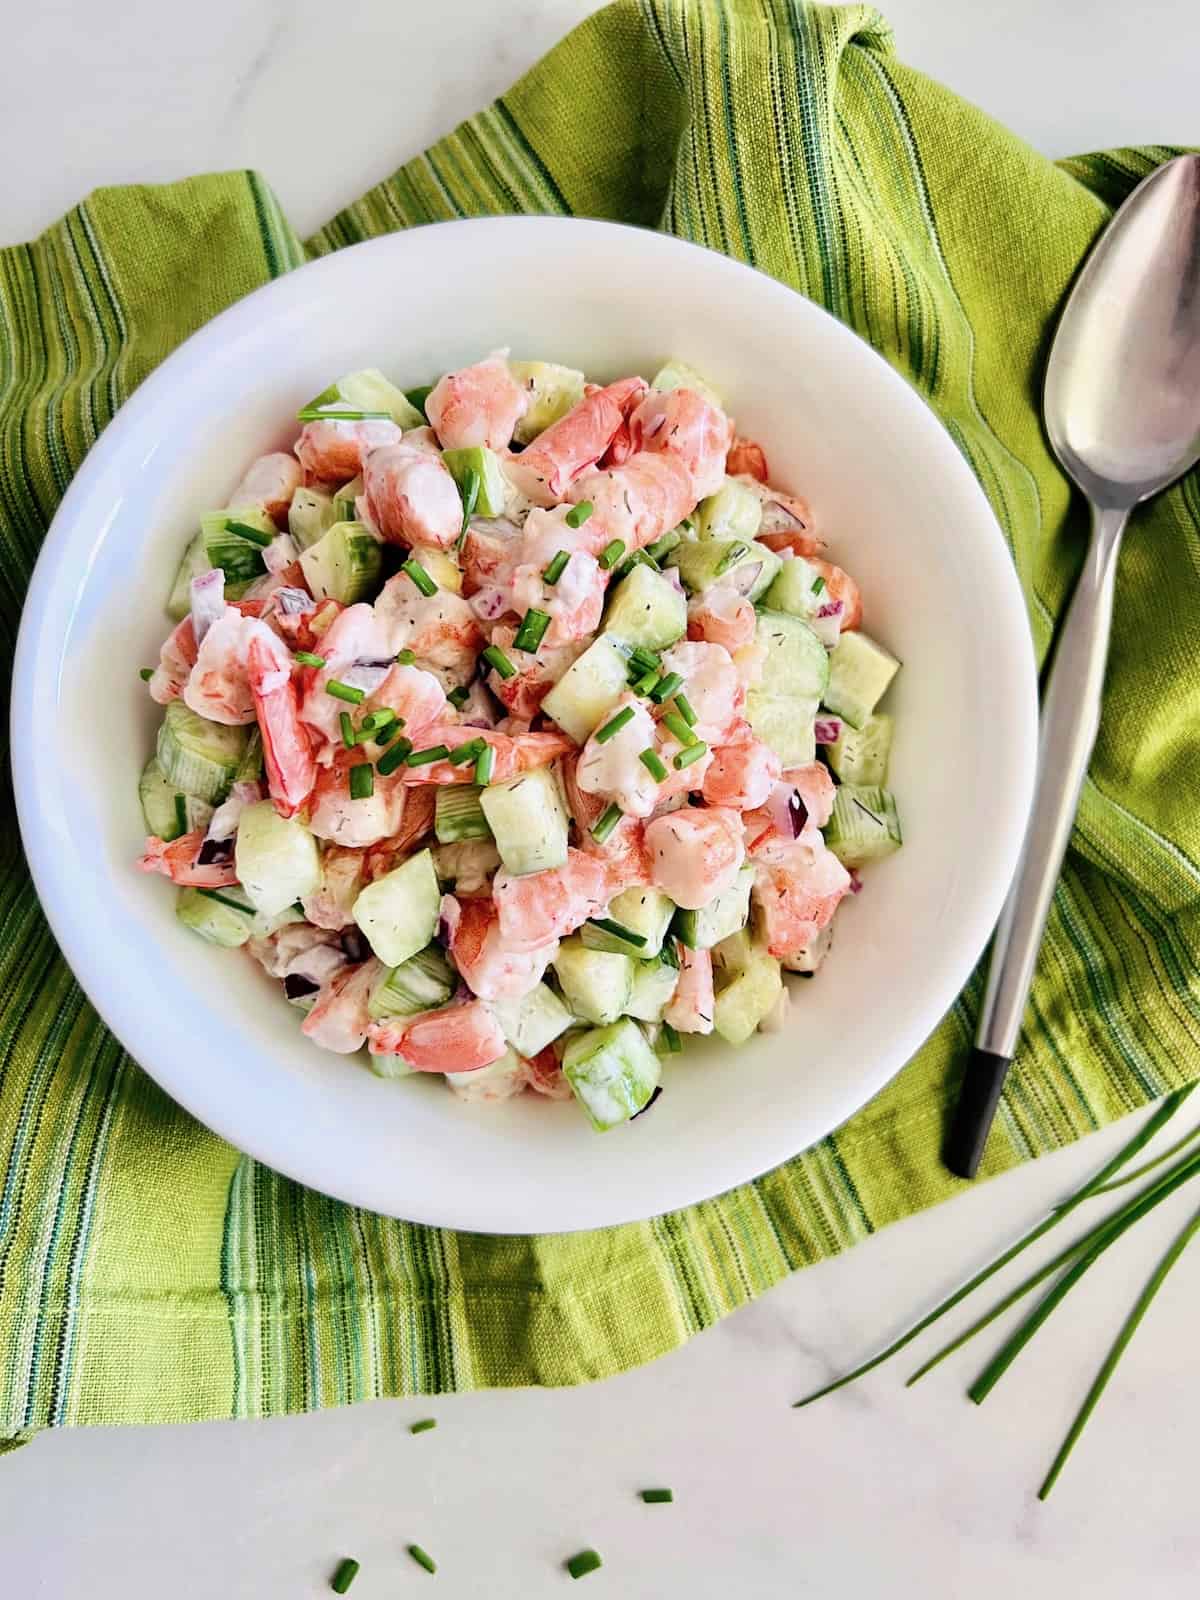 Cucumber Shrimp Salad In a white bowl with green napkin and spoon.